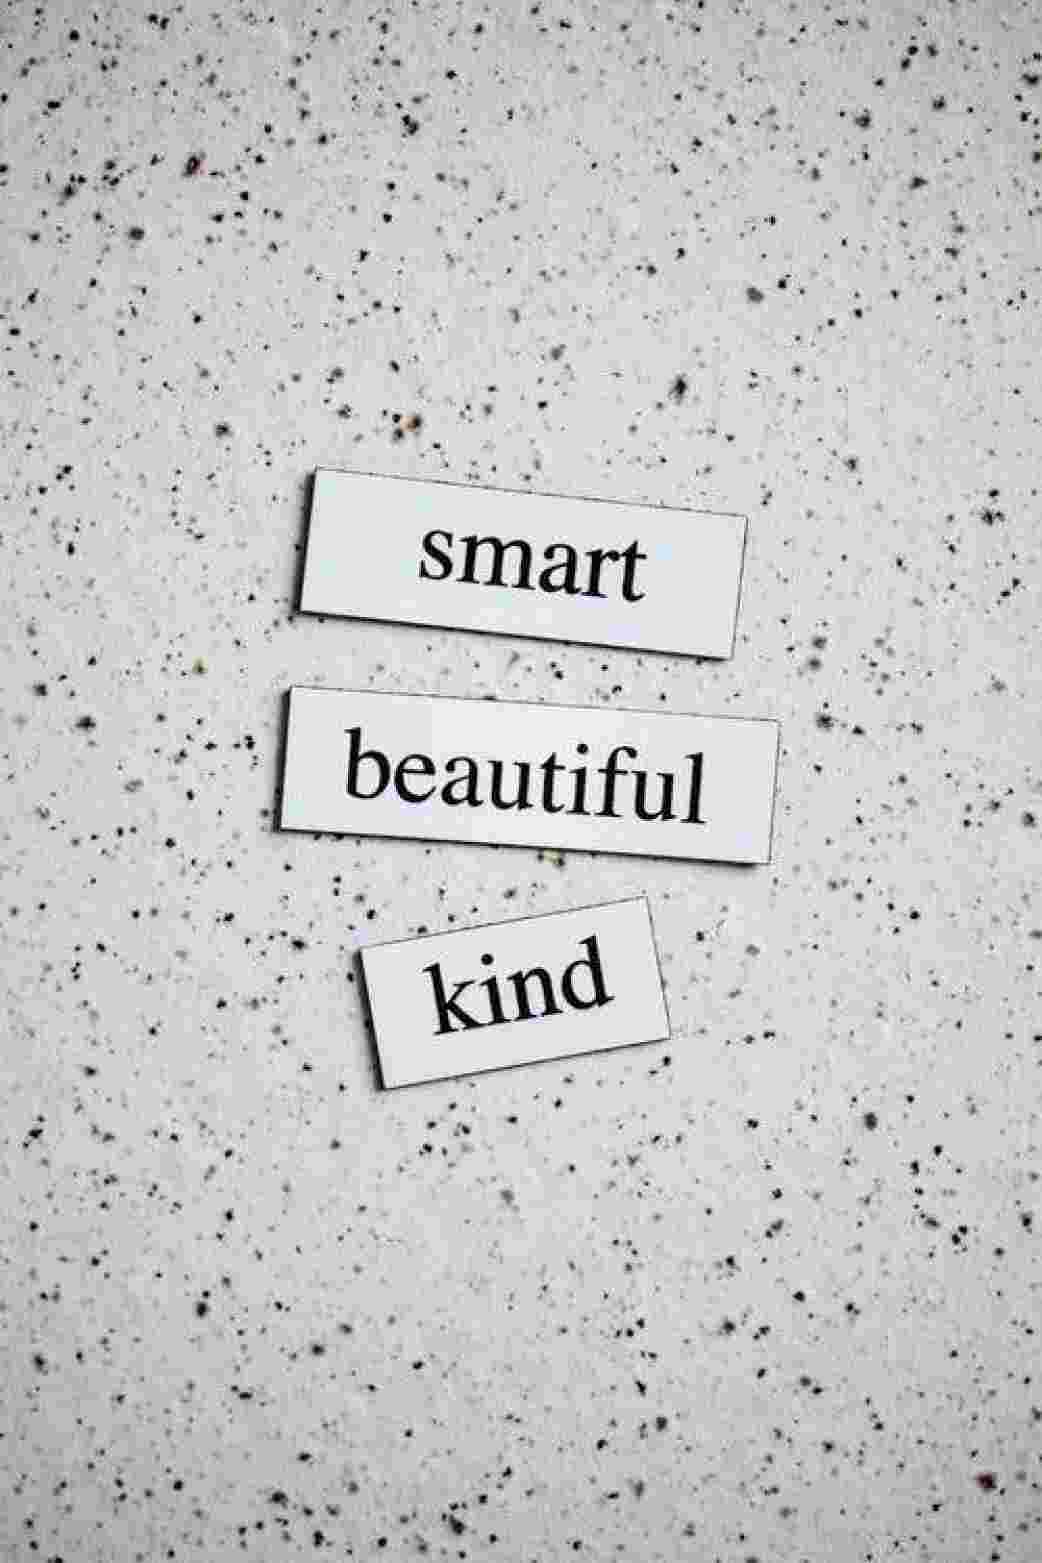 You are a beautiful, kind and smart person.